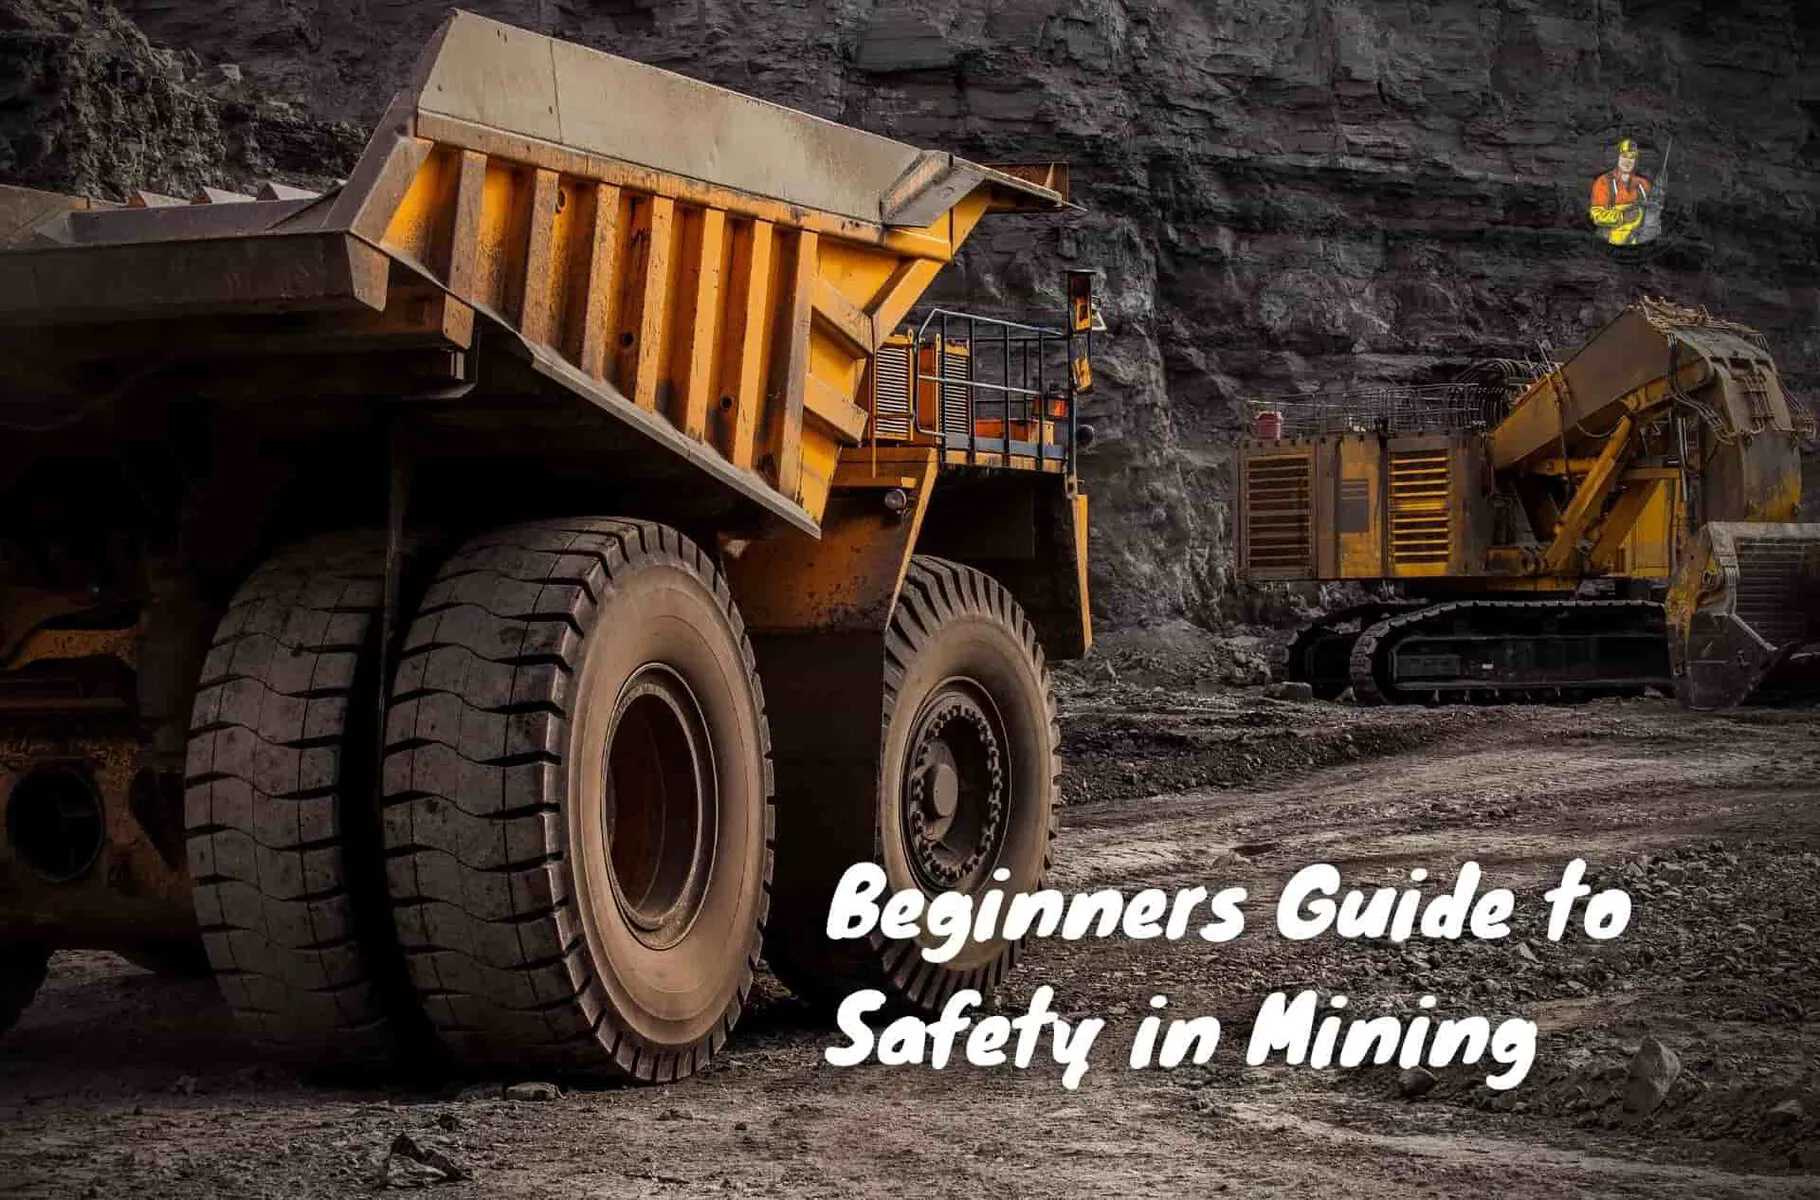 Beginners Guide to Safety in Mining | An Underground Miner